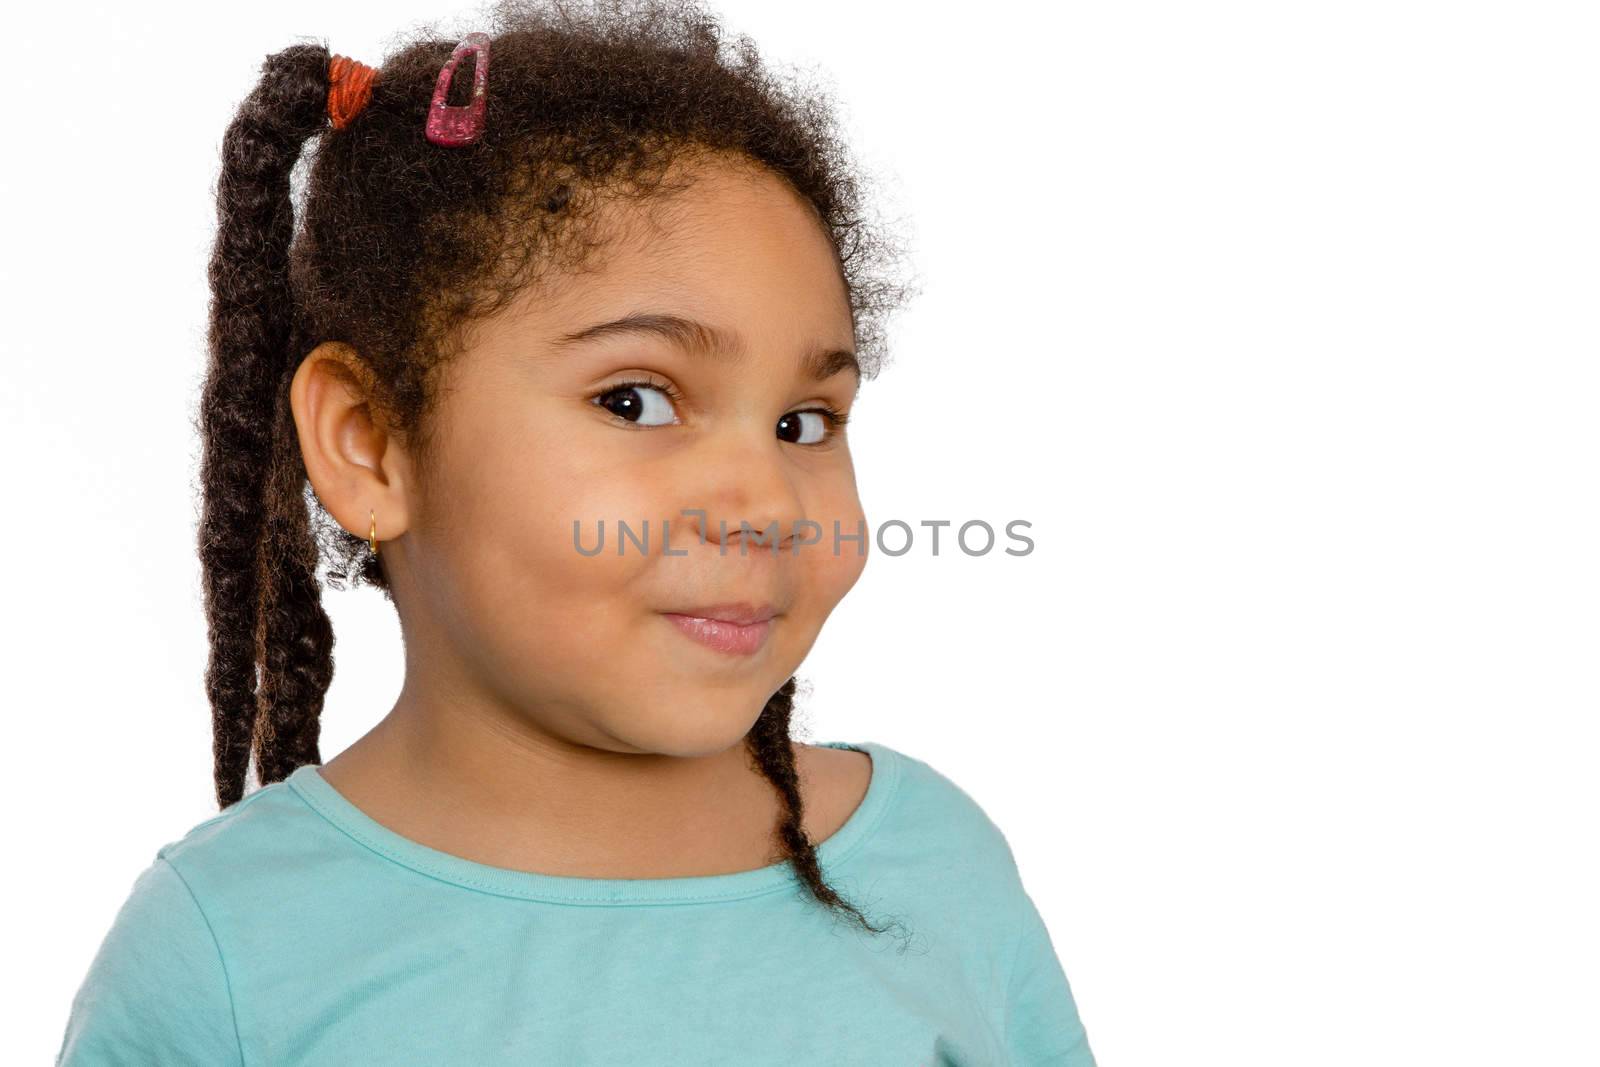 Close up Charming Four Year Old Girl Looking at the Camera Positively Against White Background.